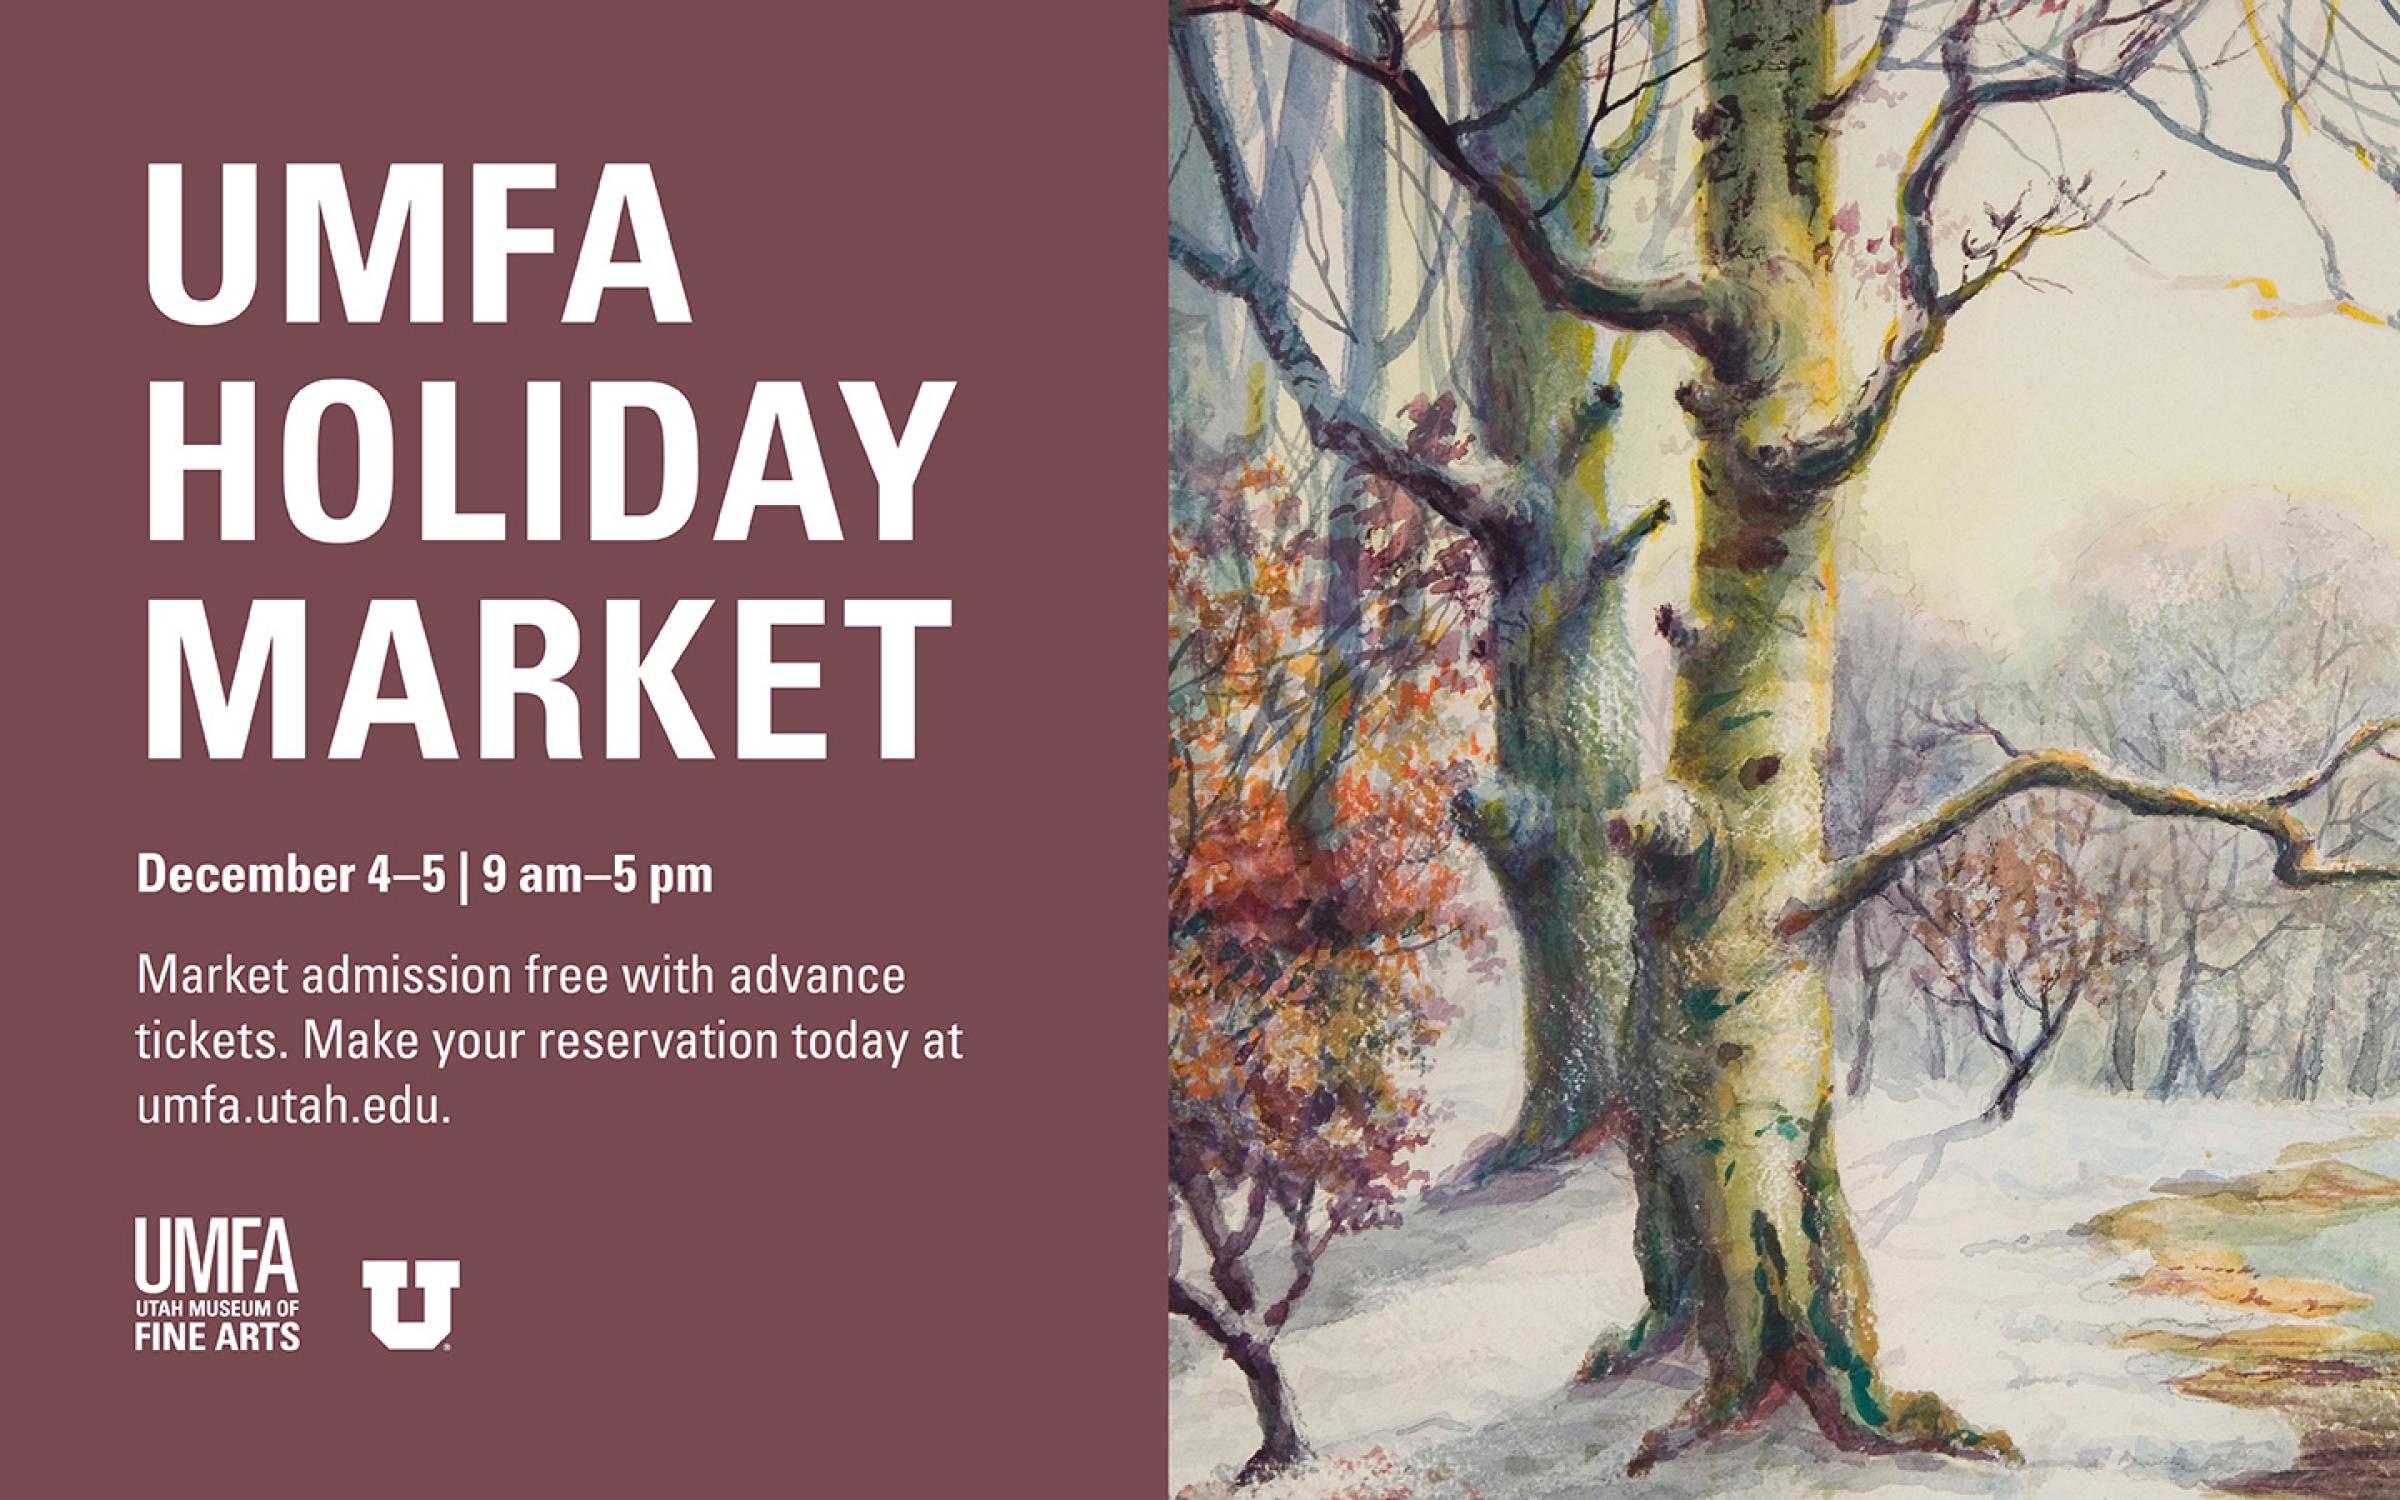 UMFA Holiday Market December 4 and 5 10 am to 5 pm